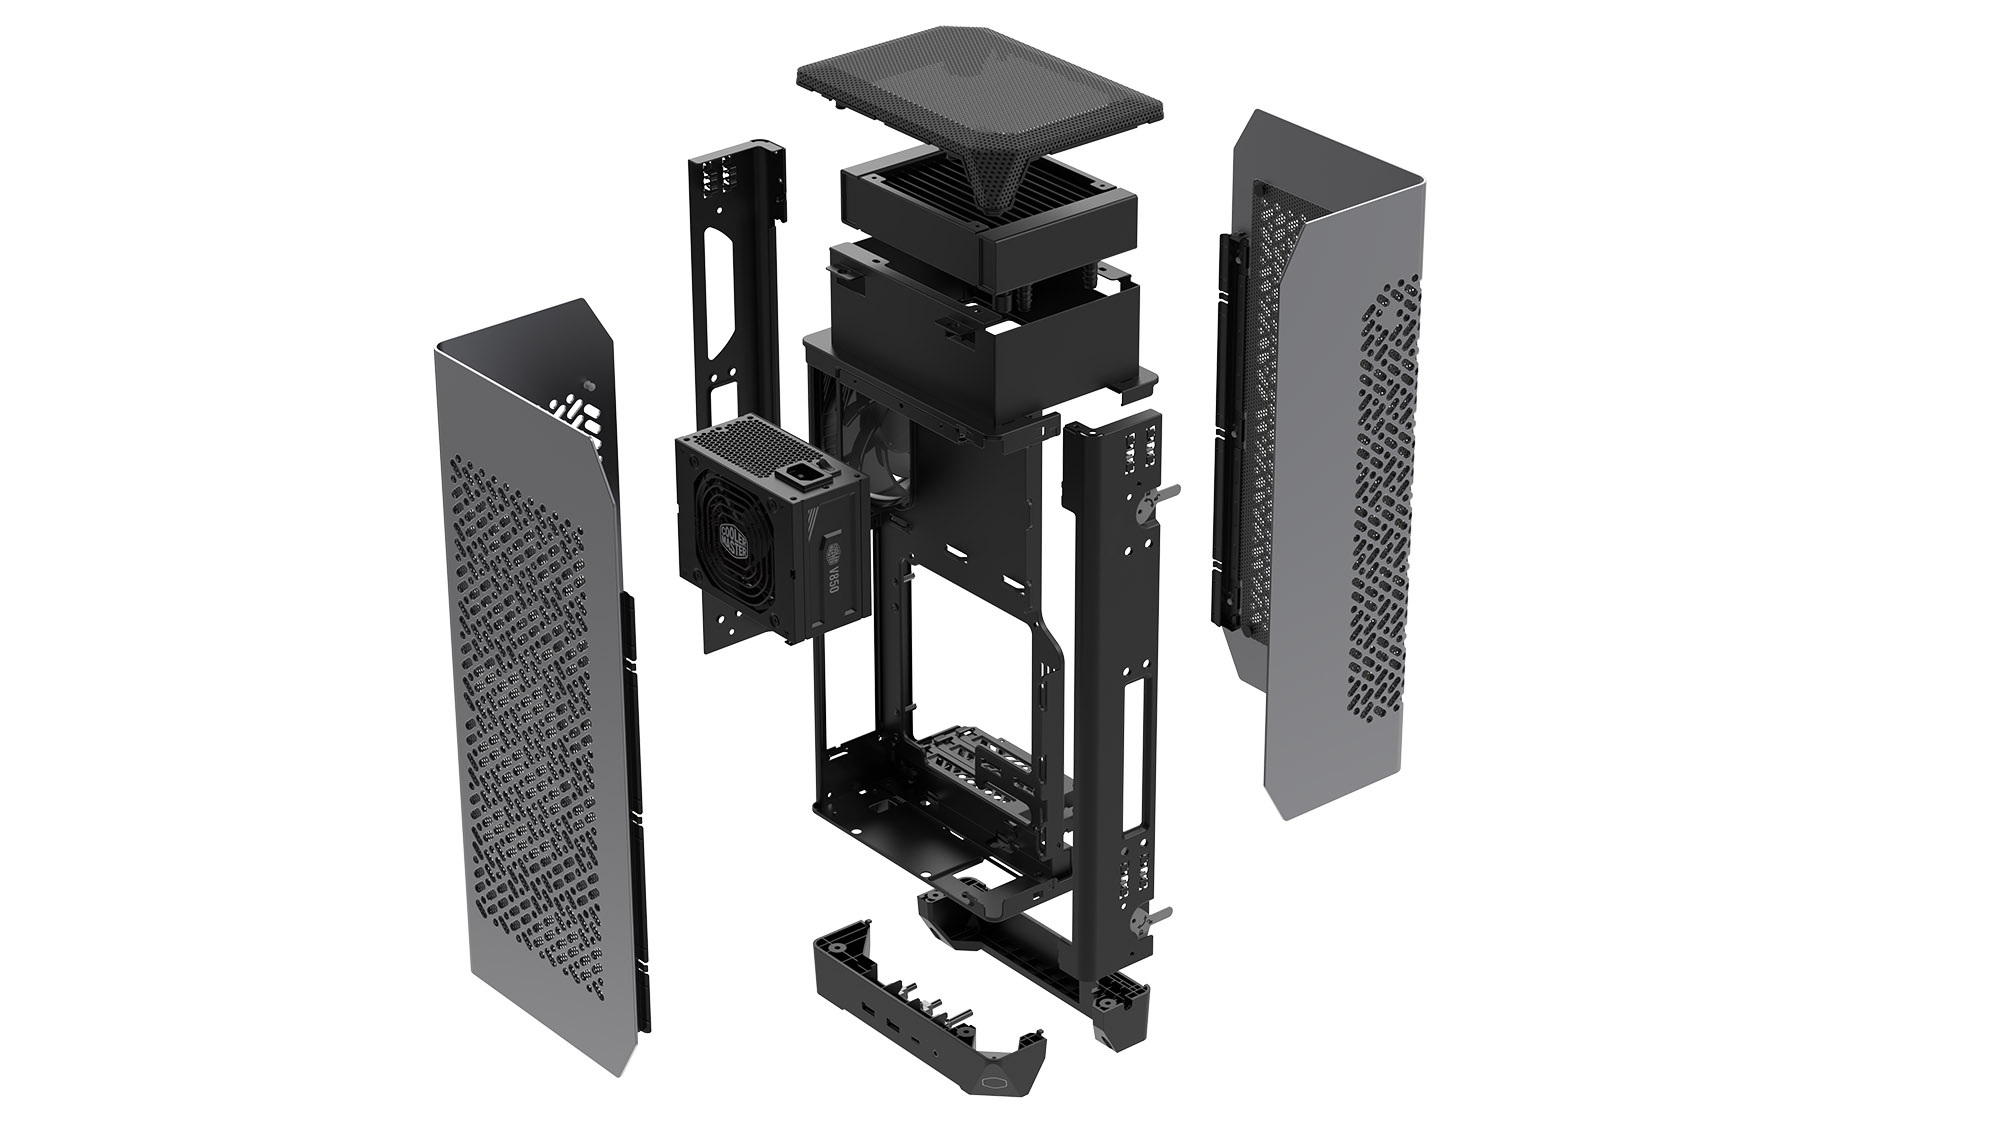 An exploded view of the Cooler Master Ncore 100 Max mini-ITX tower case.